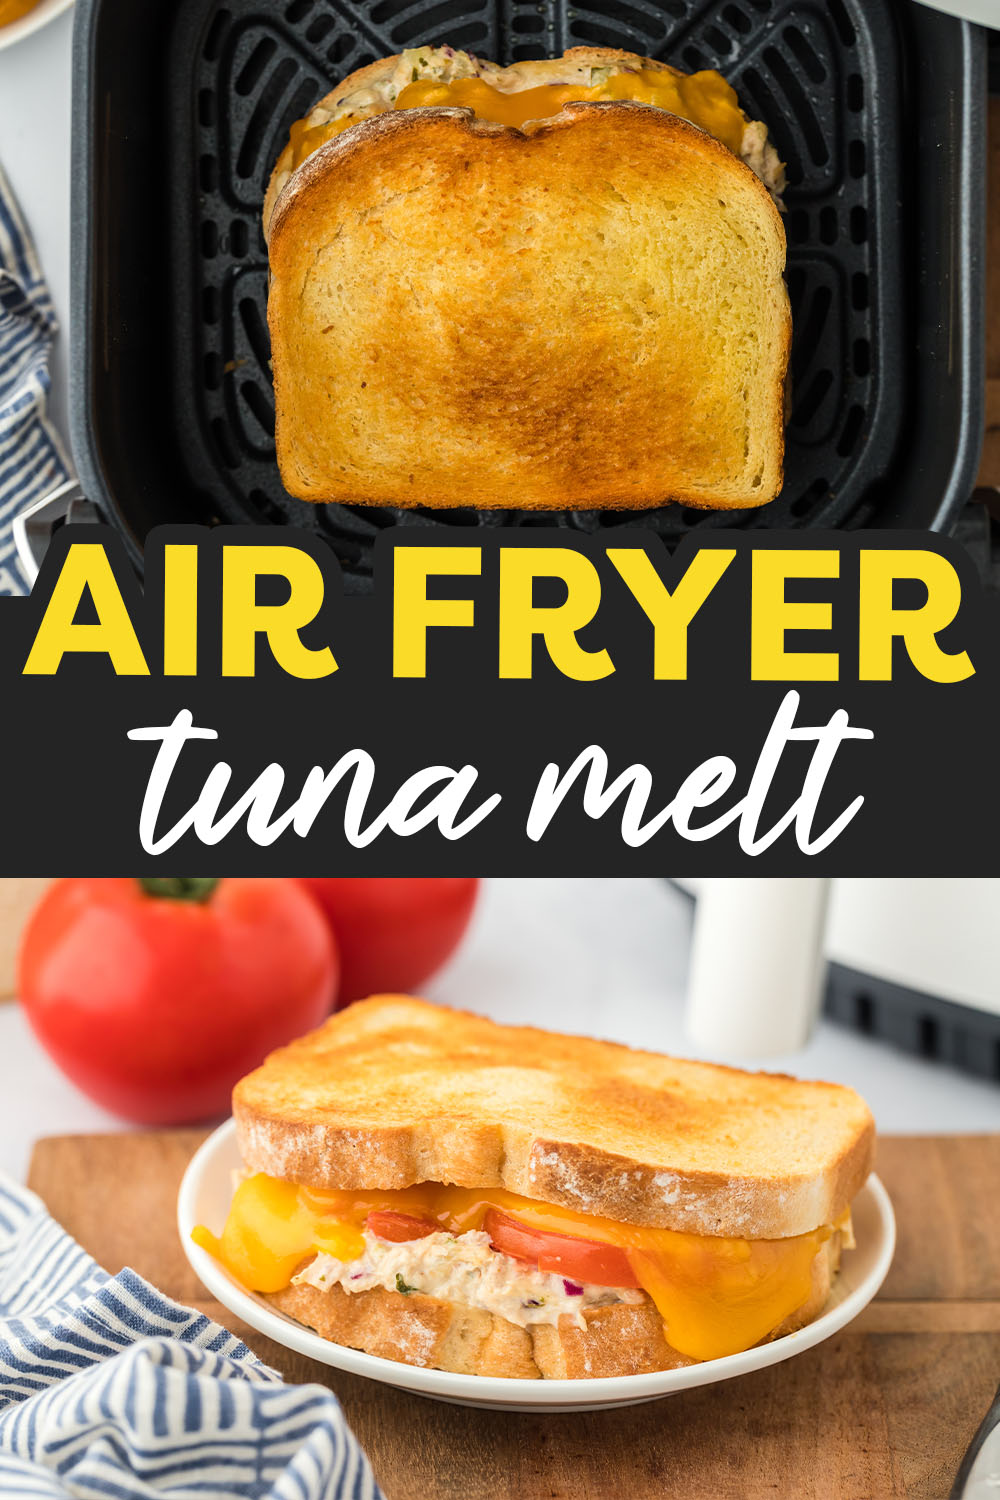 This Air Fryer Tuna Melt Recipe is made with our homemade tuna salad (so good!), your favorite bread, and lots of extra melty cheddar cheese! These tuna melts are perfect for a quick lunch in the air fryer!